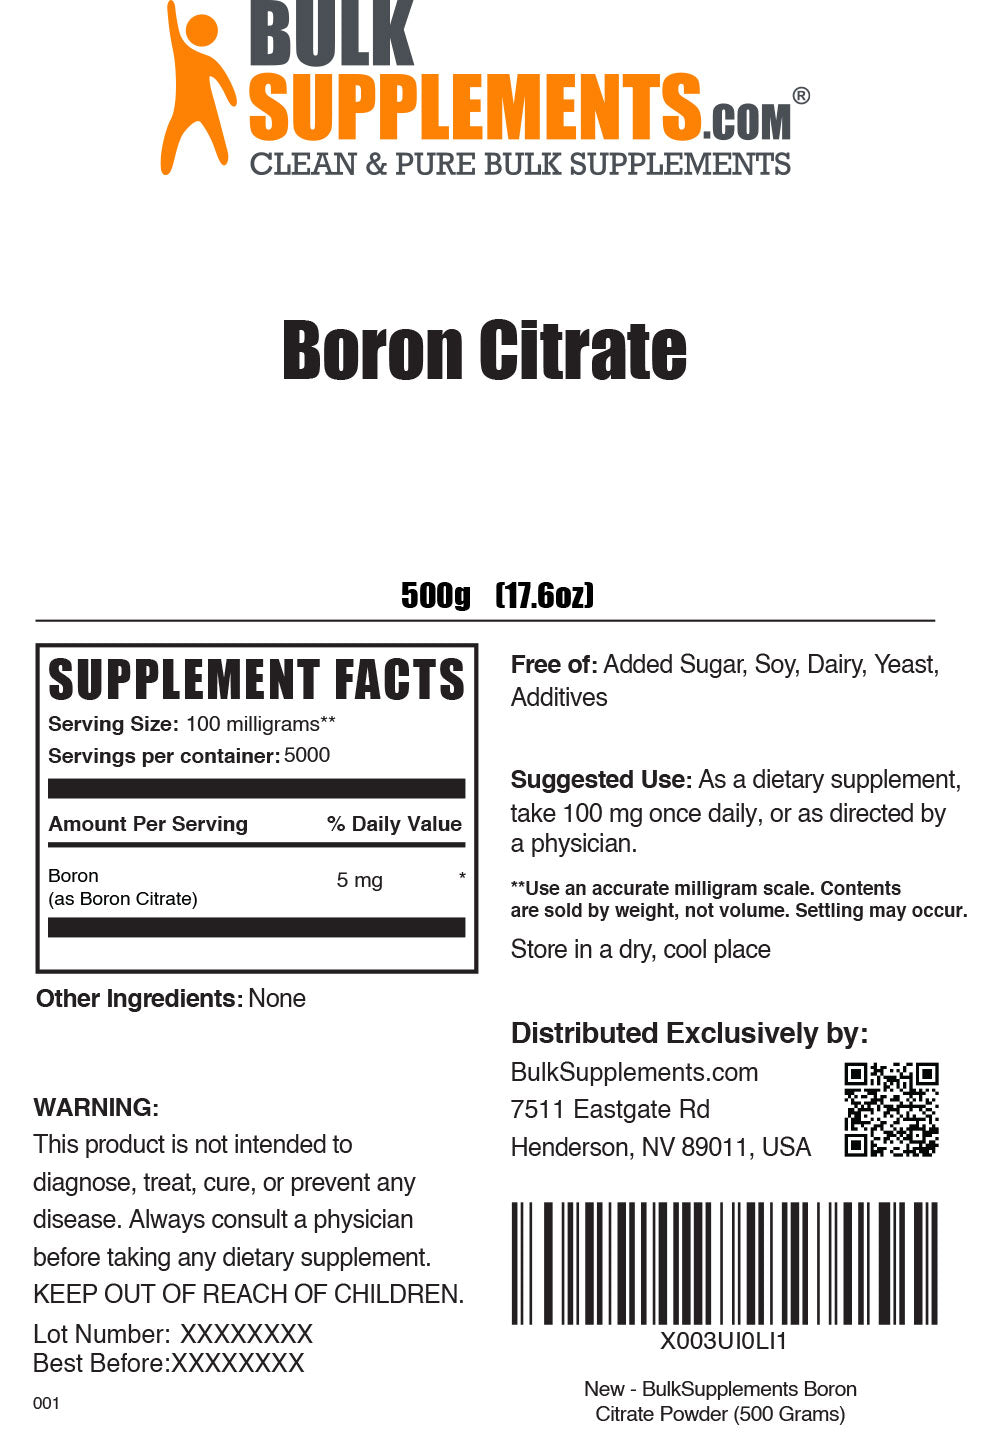 500g of Boron Citrate Supplement Facts